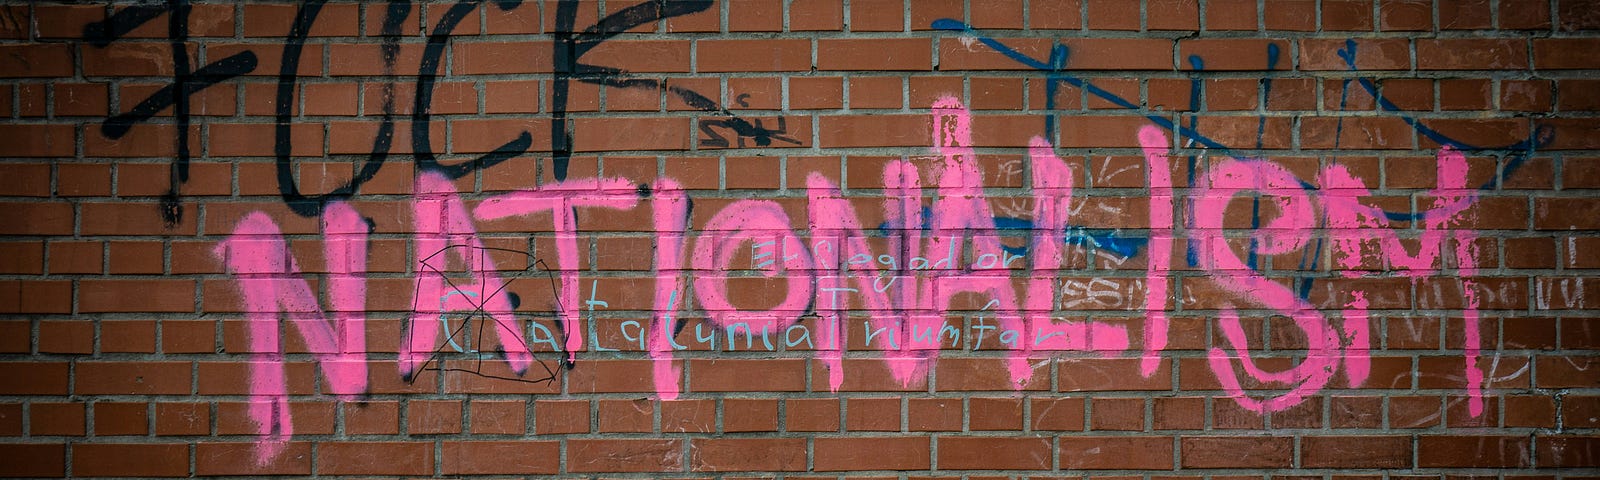 Graffiti on a brick wall. The words read: Fuck Nationalism